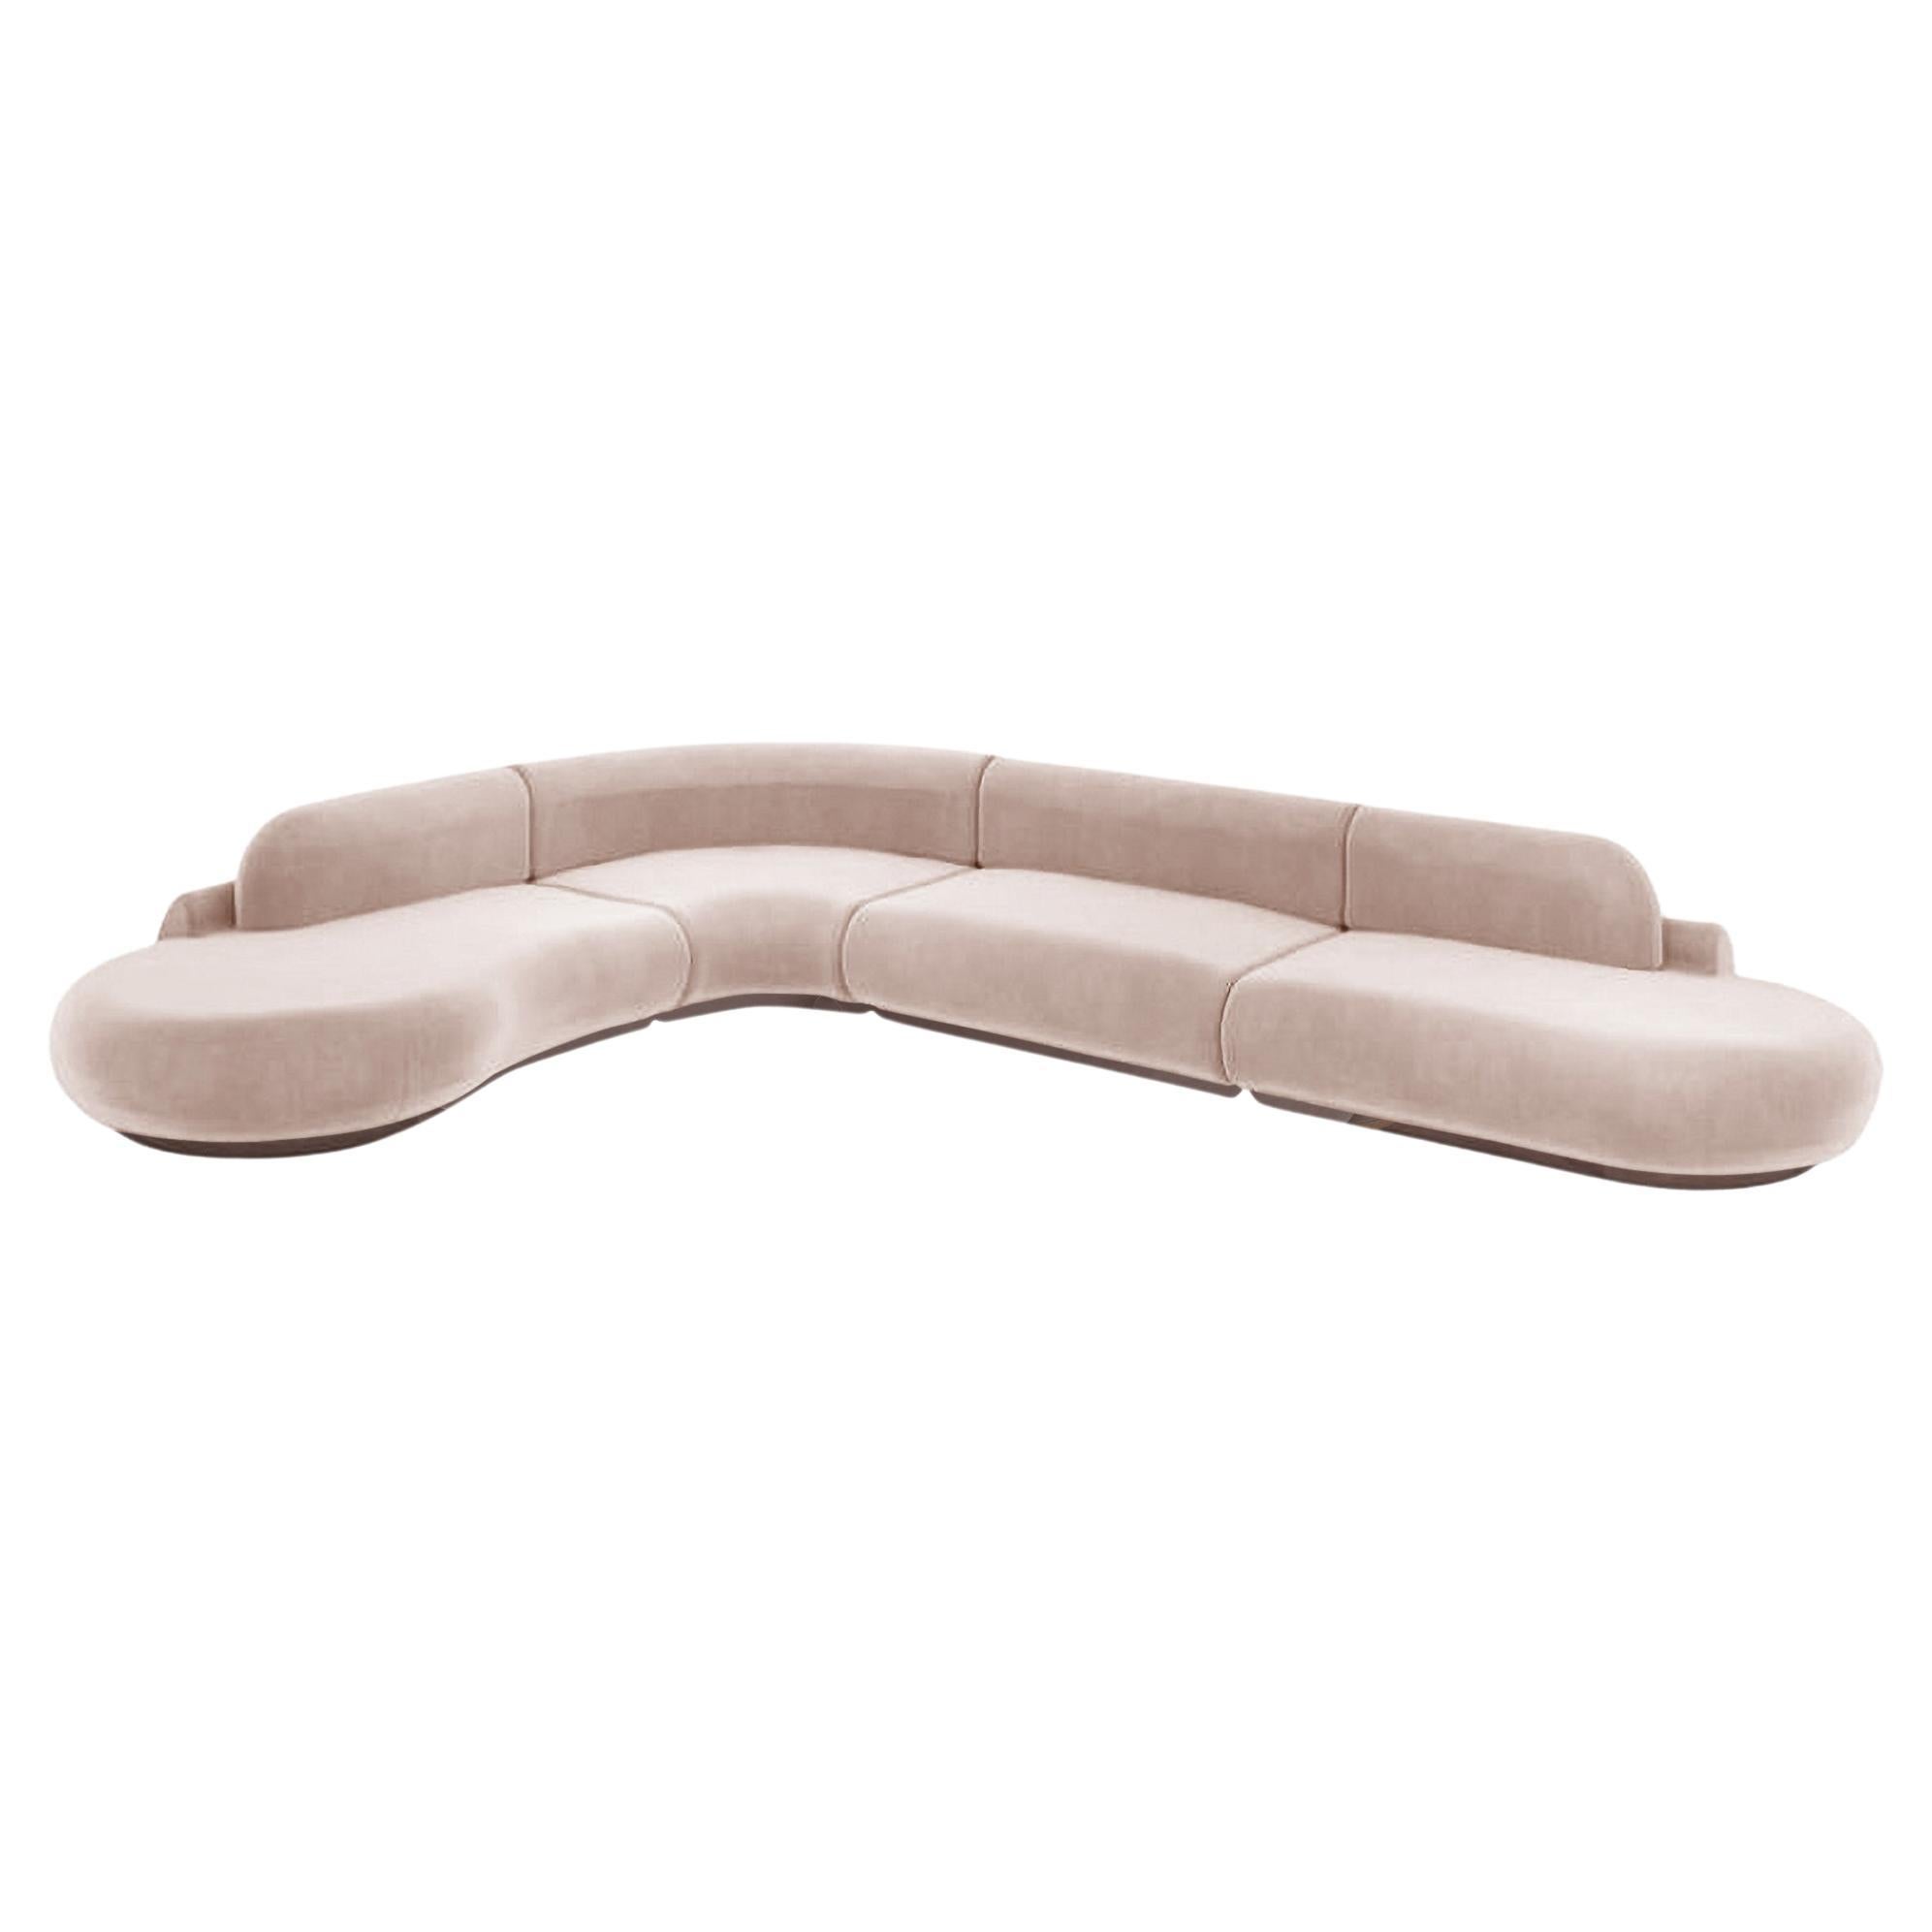 Naked Sectional Sofa, 4 Piece with Beech Ash-056-1 and Vigo Blossom For Sale